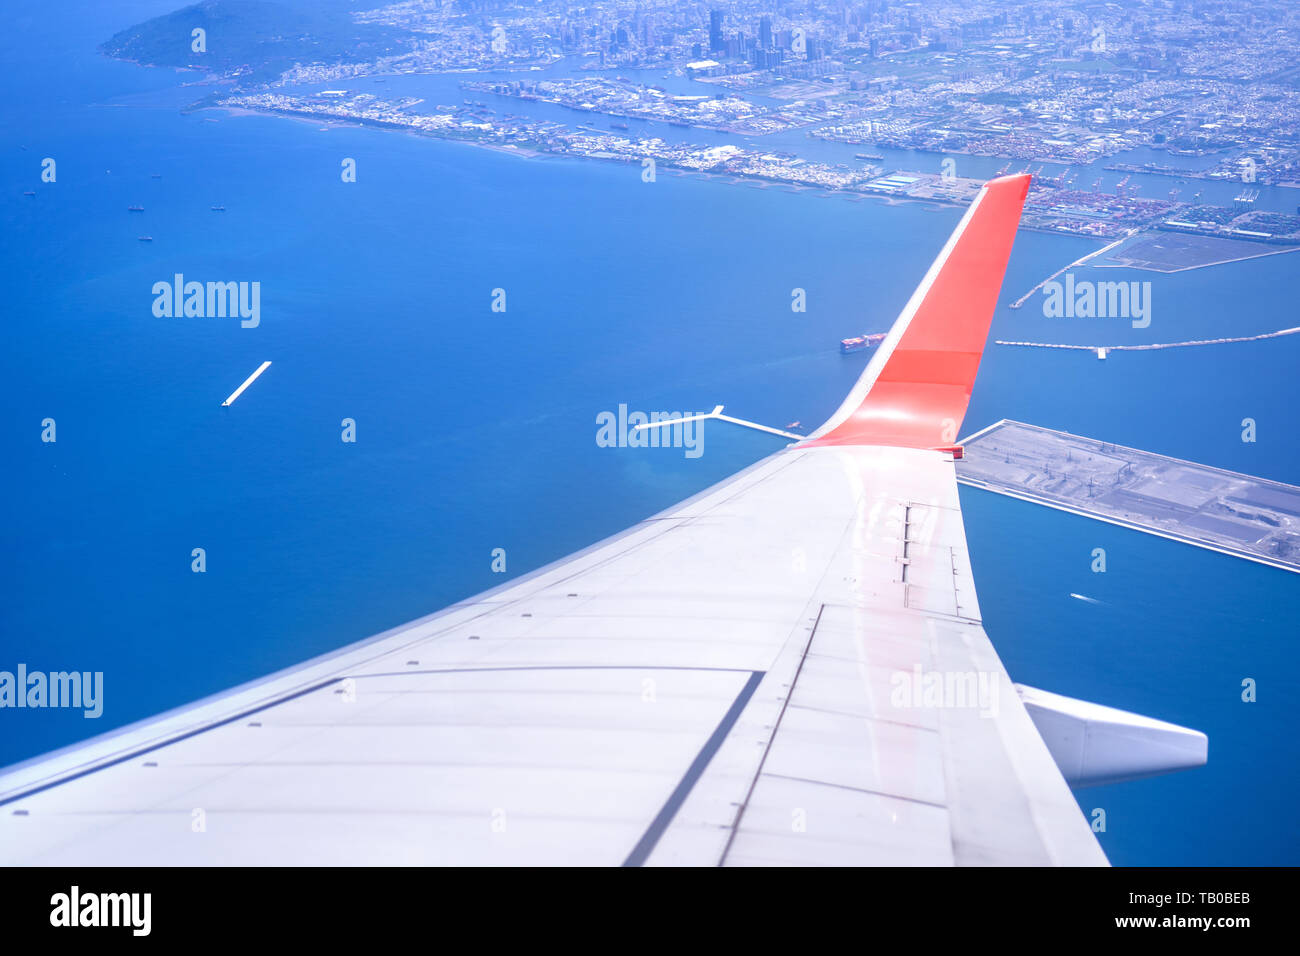 Bussiness and travel concept. Aerial view through window inside aircraft cabin with beautiful blue sky and cloud with sunlight, copy space, top view Stock Photo